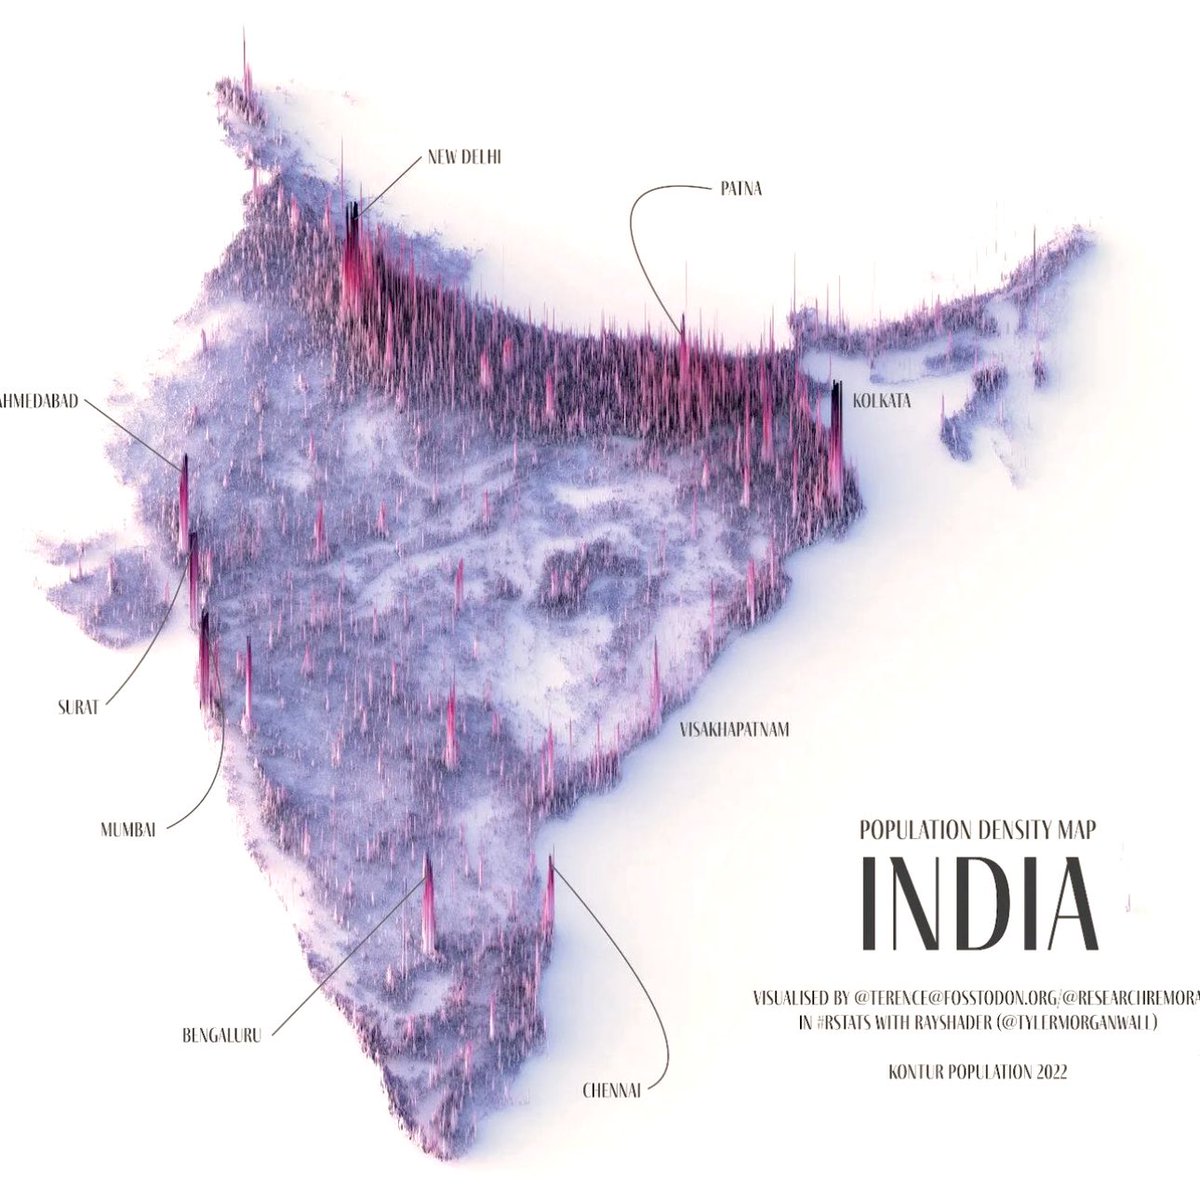 Population distribution and density in #India ➡️ #density #geographymatters